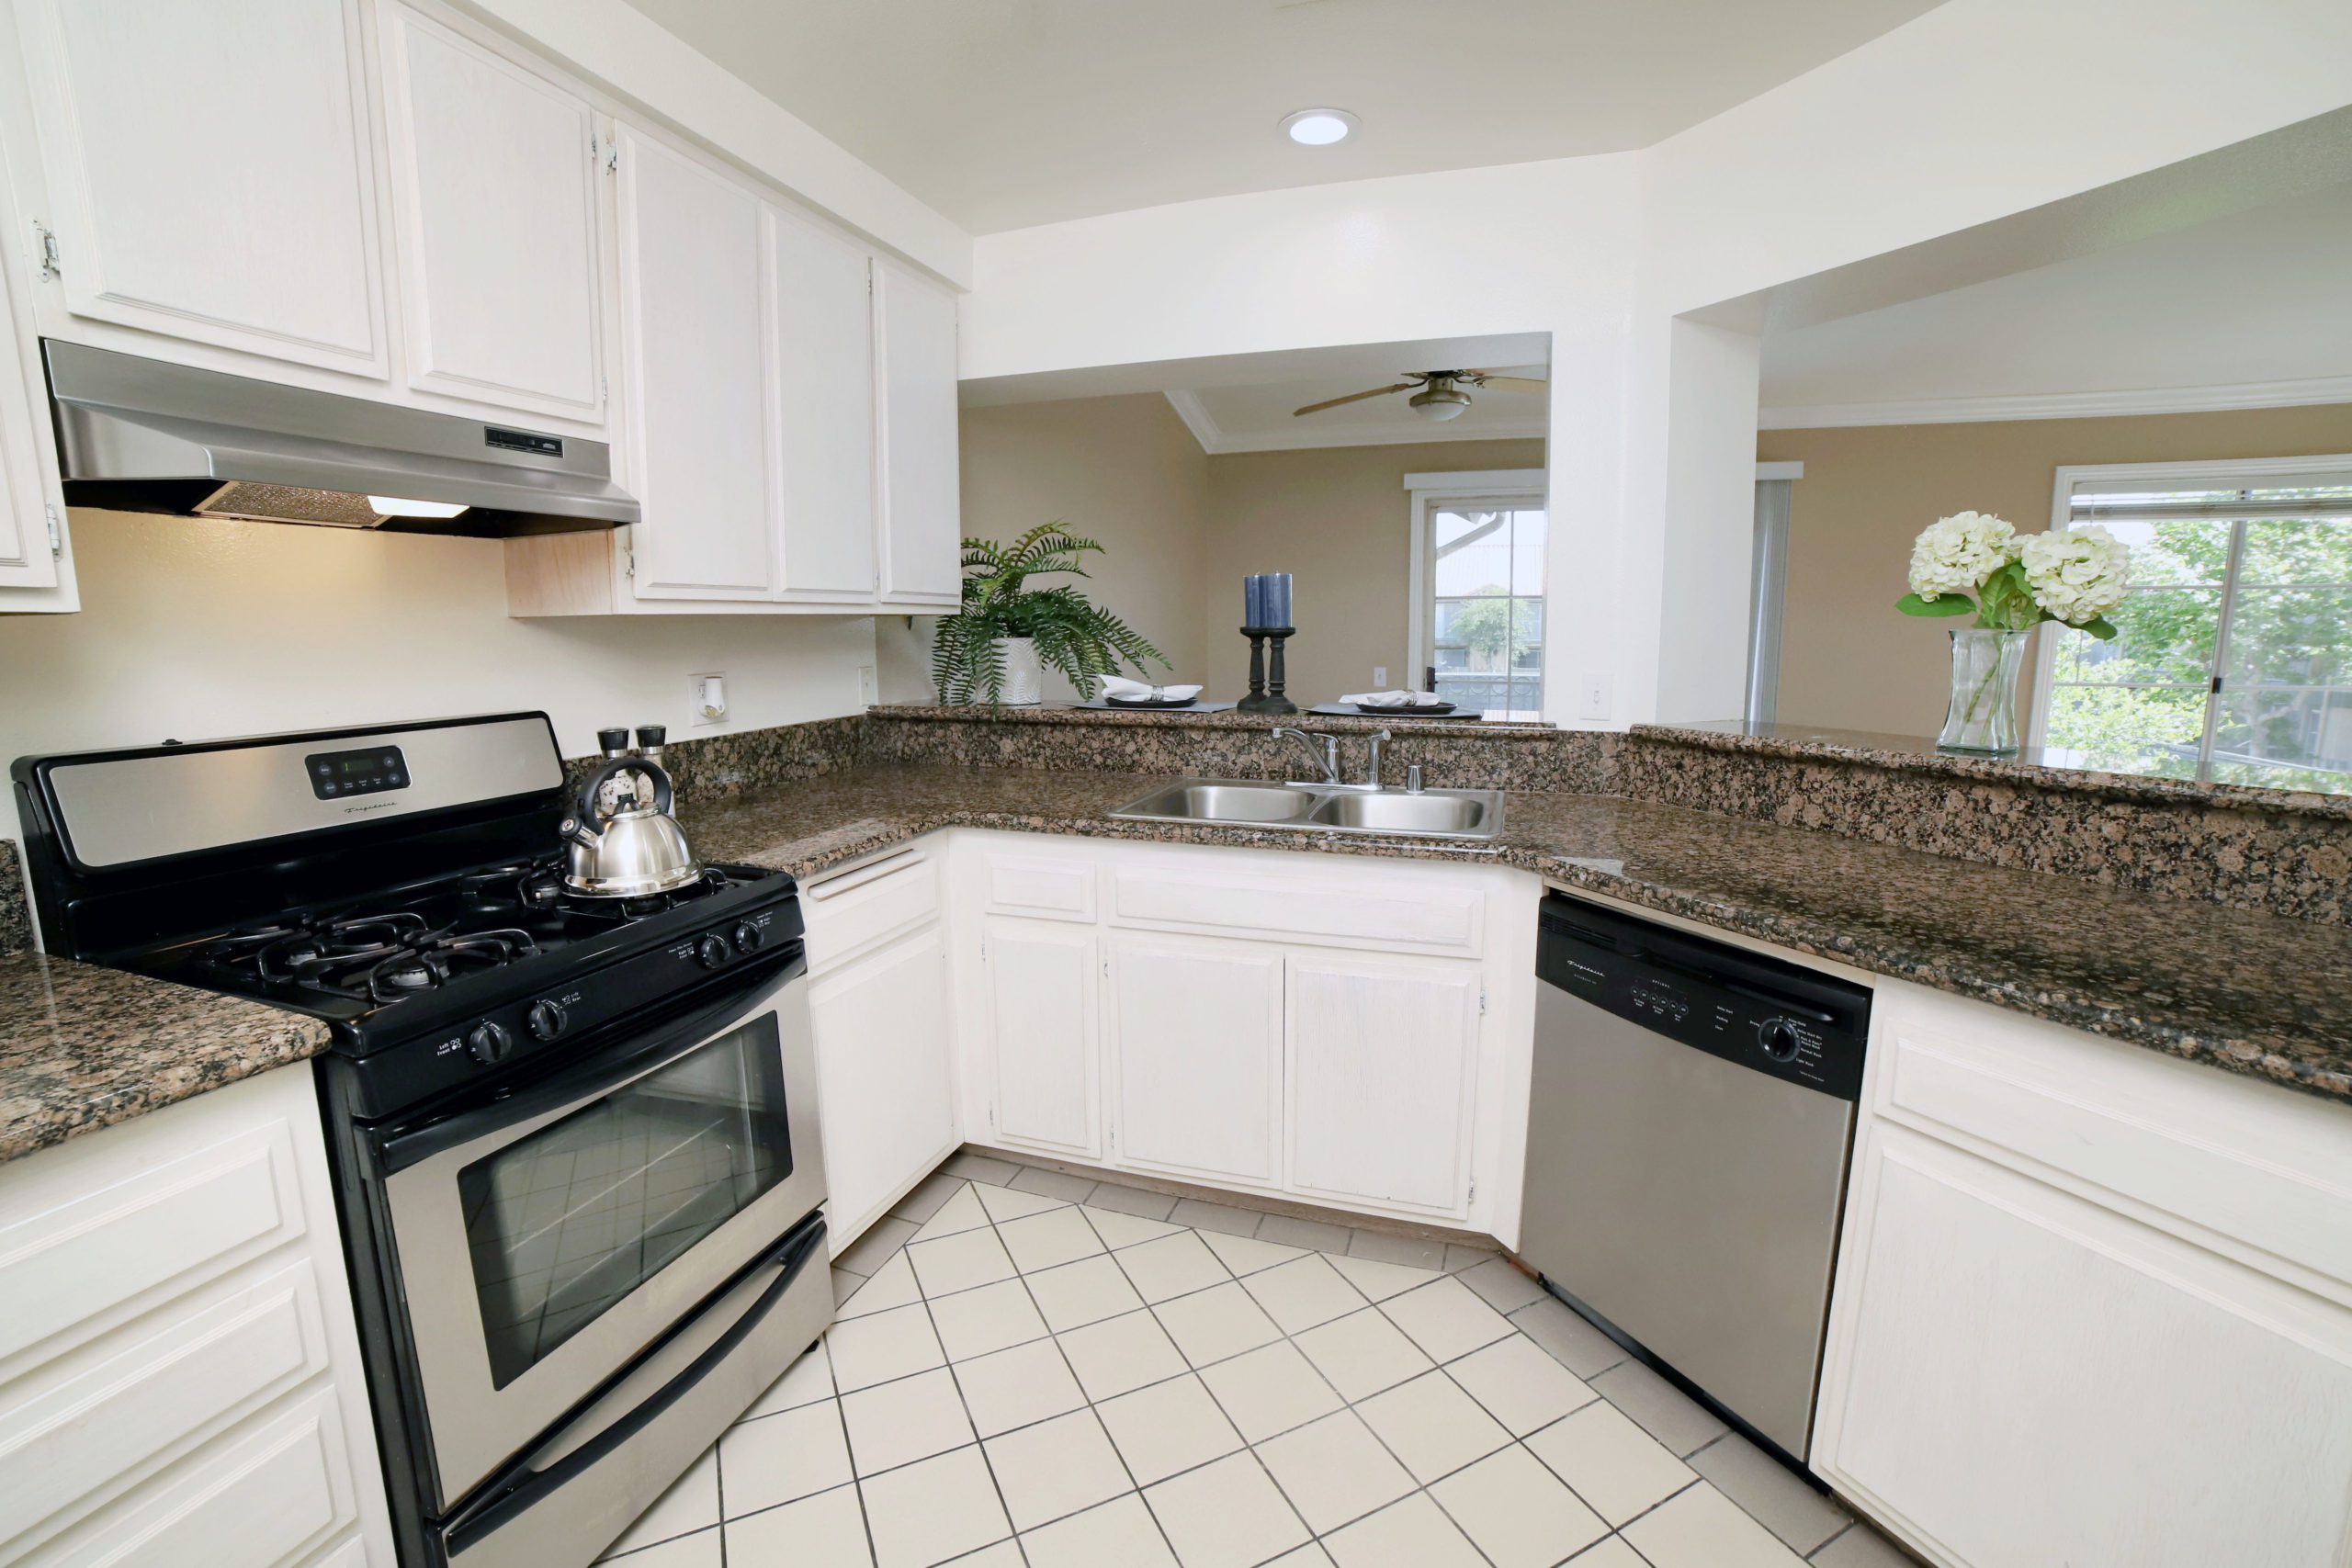 Apartments for Rent in Anaheim - Le Med - Kitchen with Whitewashed Cabinets, Granite Countertops, Stainless Steel Appliances, and Ceramic Tile Floors